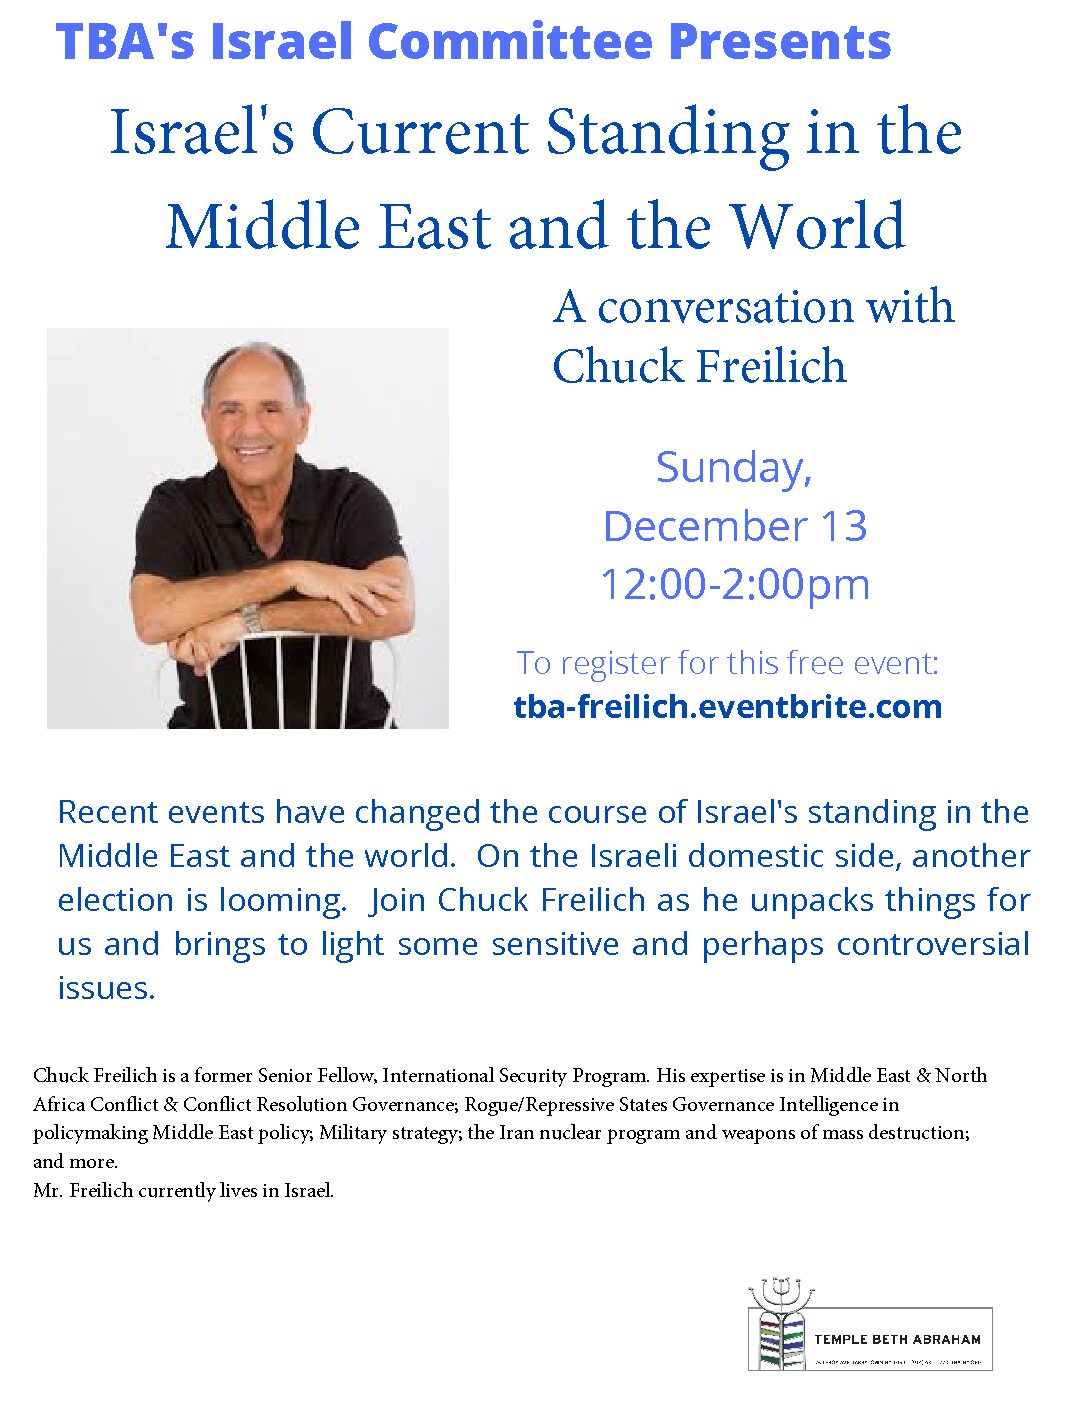 TBA's Israel Committee Presents-Israel's Current Standing in the Middle East and the World - A Conversation with Chuck Frelich